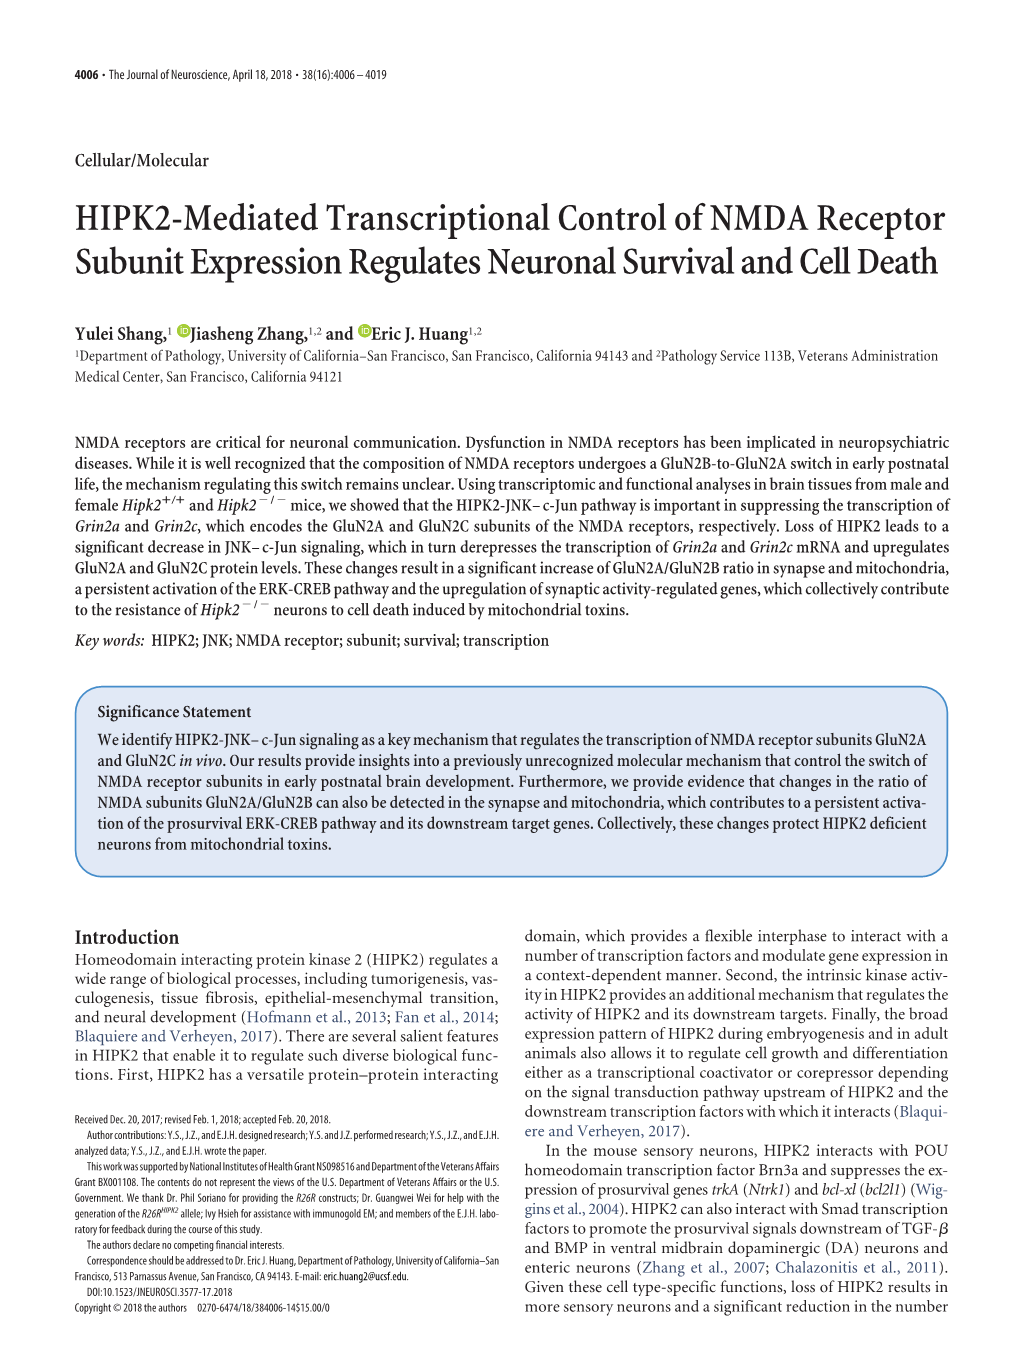 HIPK2-Mediated Transcriptional Control of NMDA Receptor Subunit Expression Regulates Neuronal Survival and Cell Death